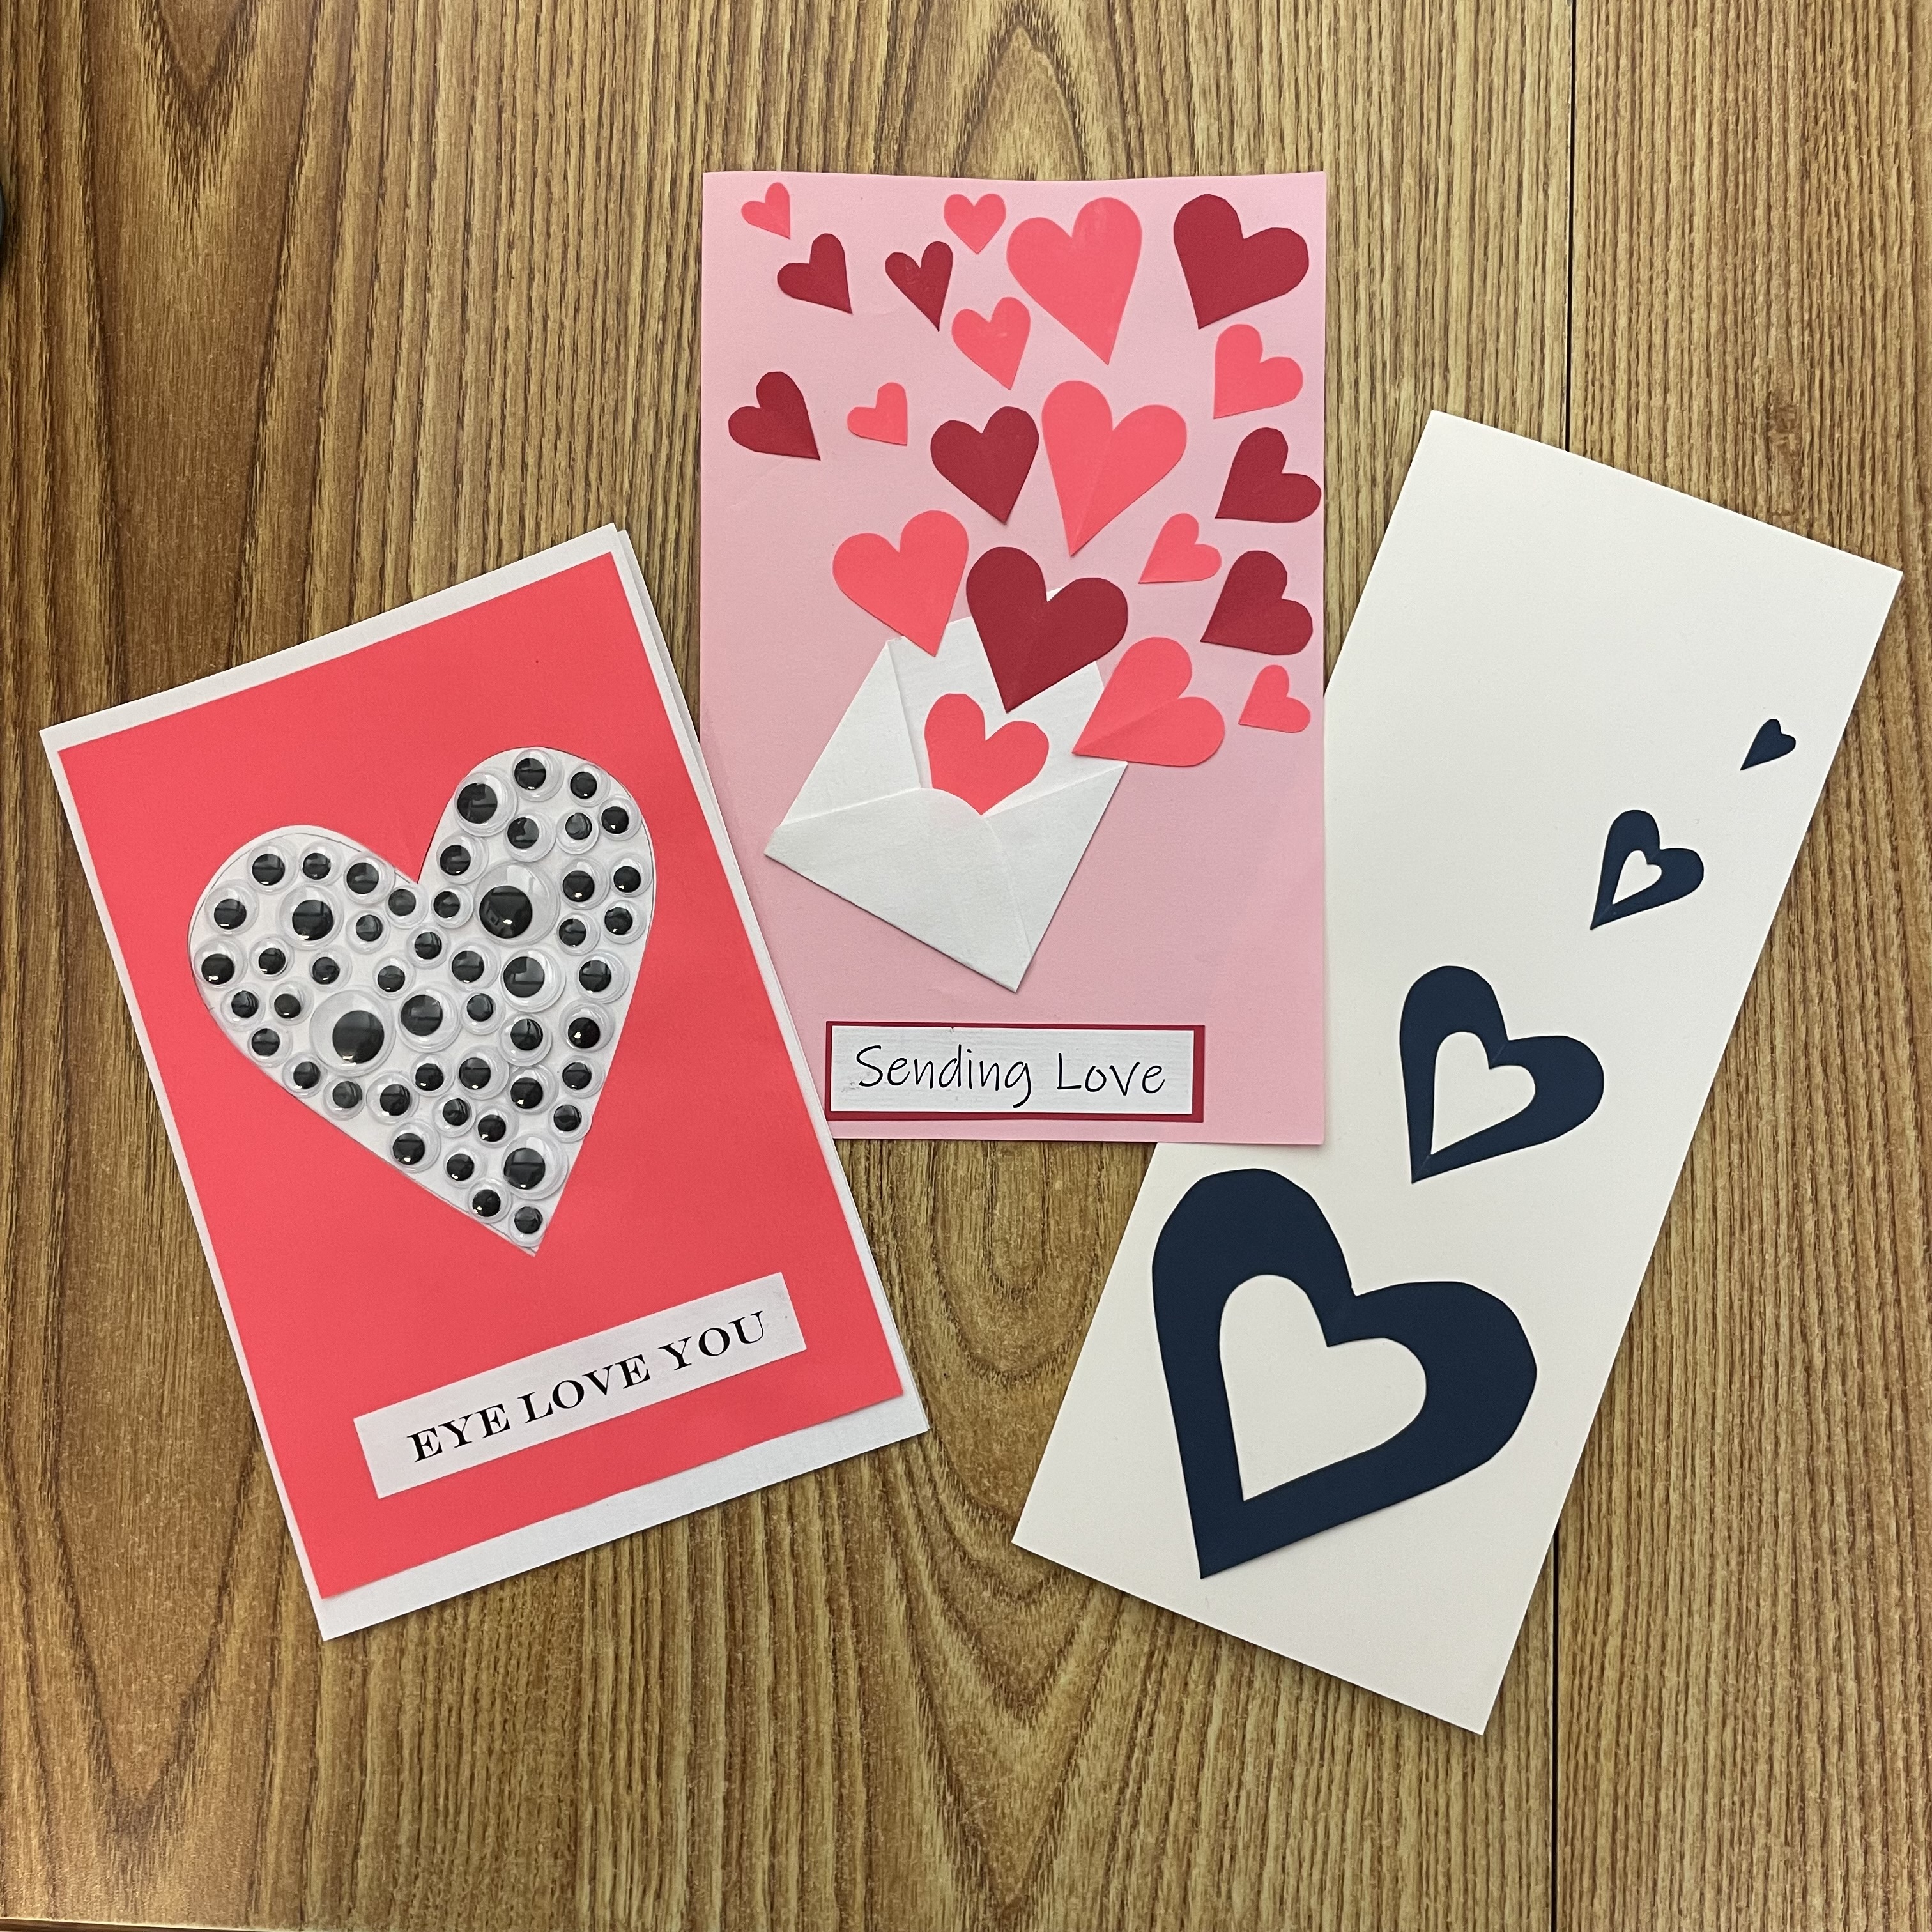 Three Valentine's cards show google eyes in a heart, reads, "Eye Love You", plus envelope with heart coming out, says "Sending Love", and third card has four blue hearts